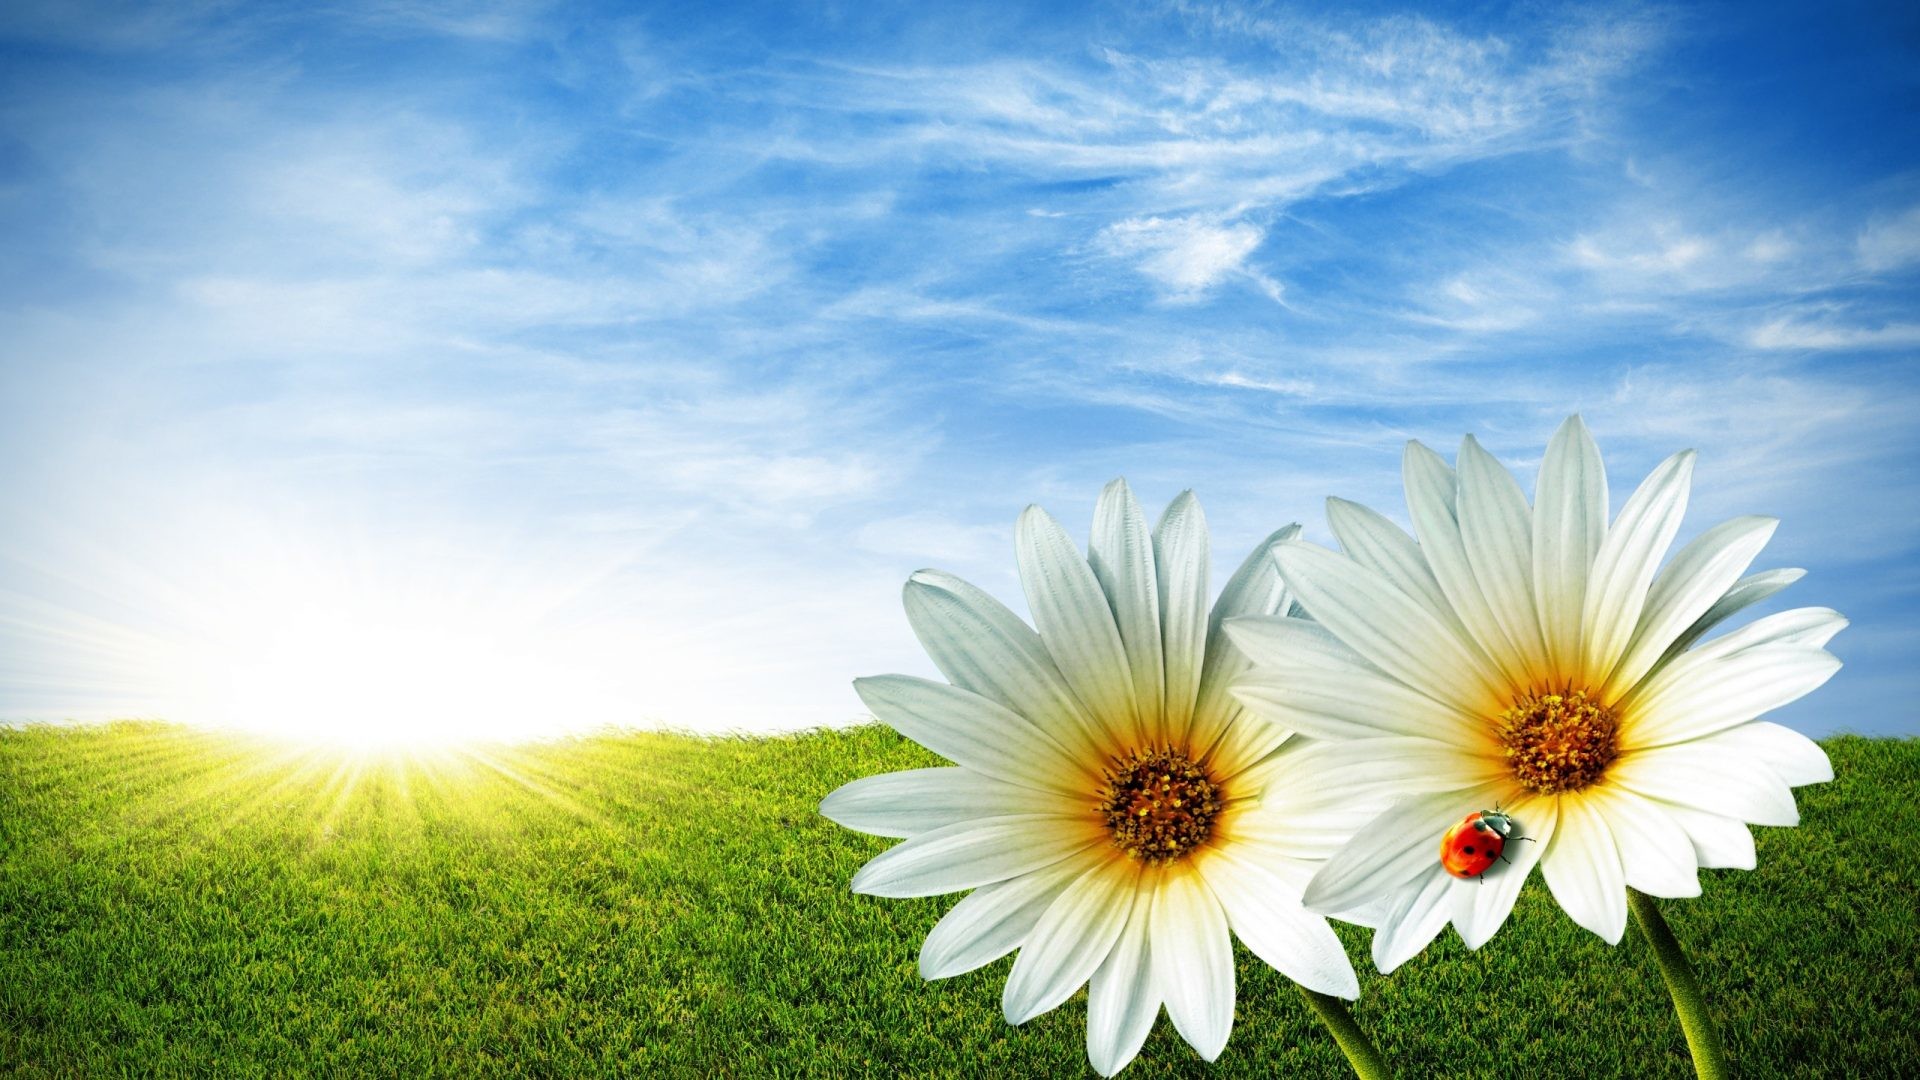 1920x1080 Daisy Tag - Blue Sunshine Sun Nature Bug Skies Lovely Grass Lady Field Daisy  Clouds Spring